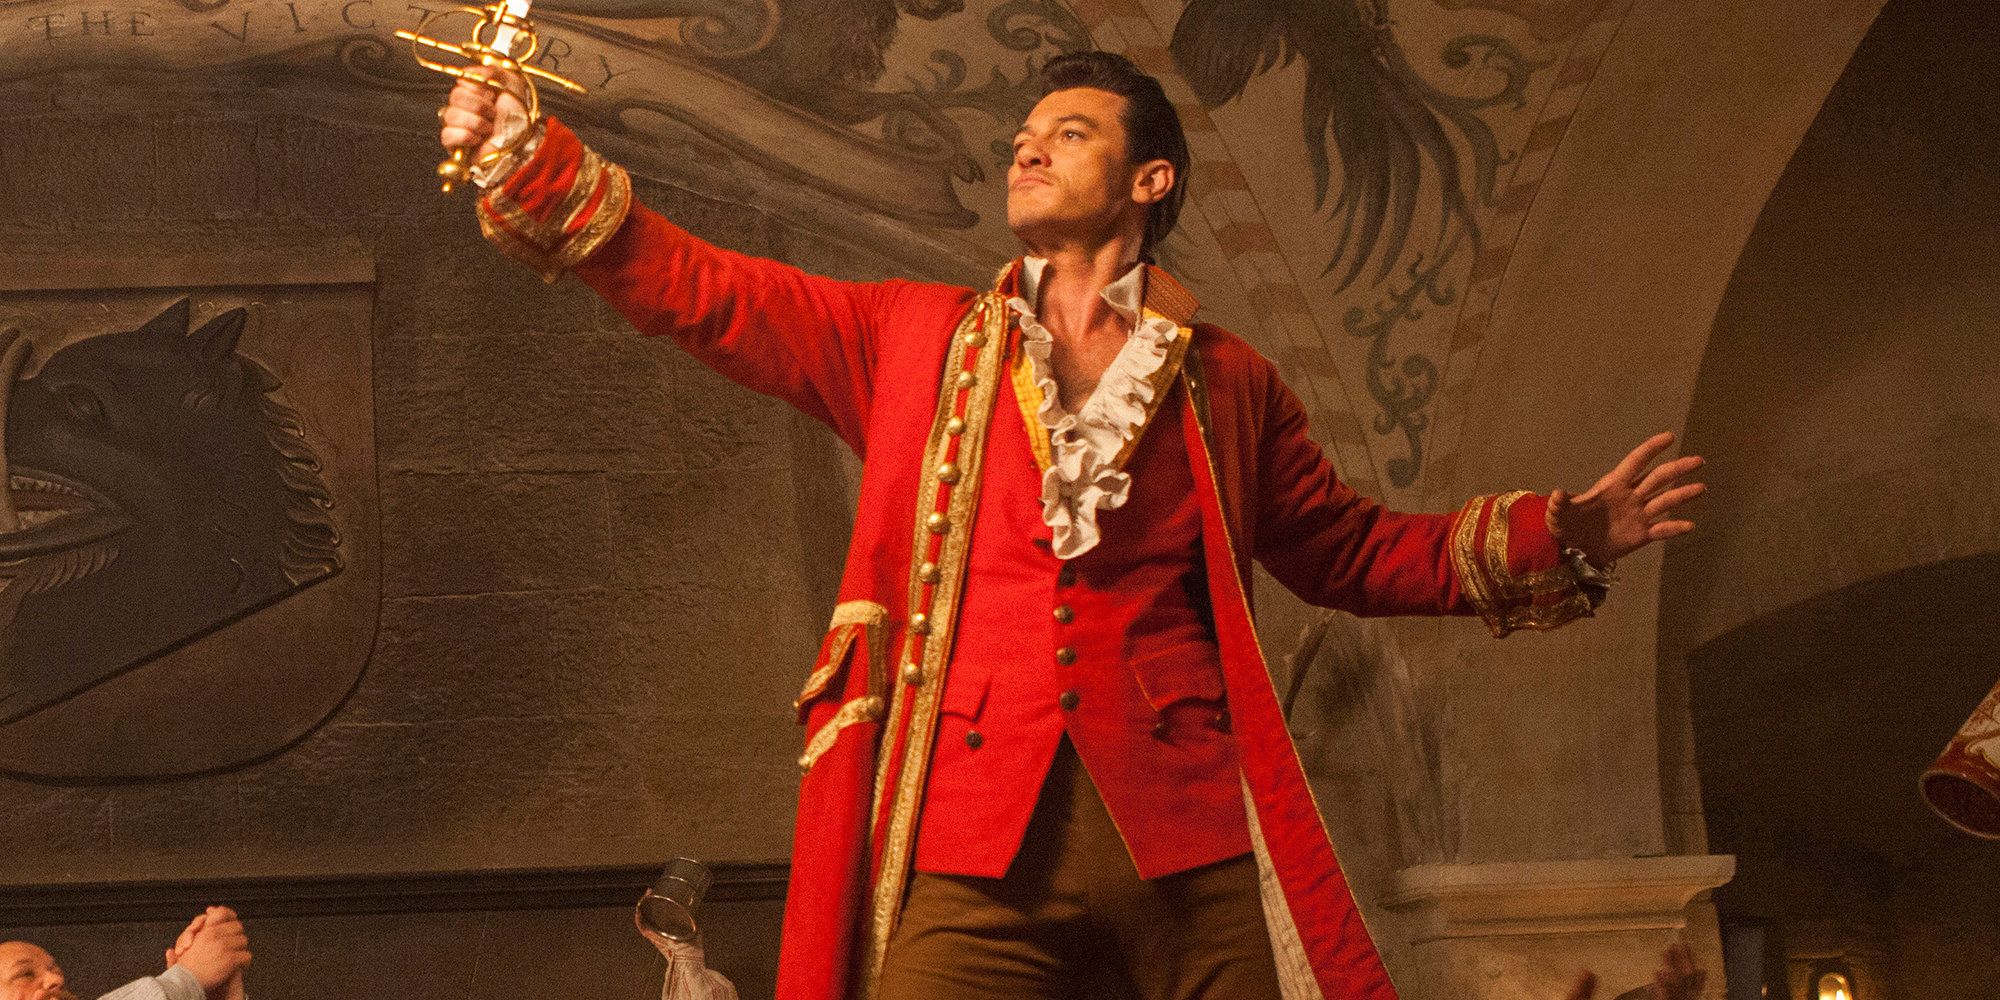 Luke Evans as Gaston in Beauty and the Beast